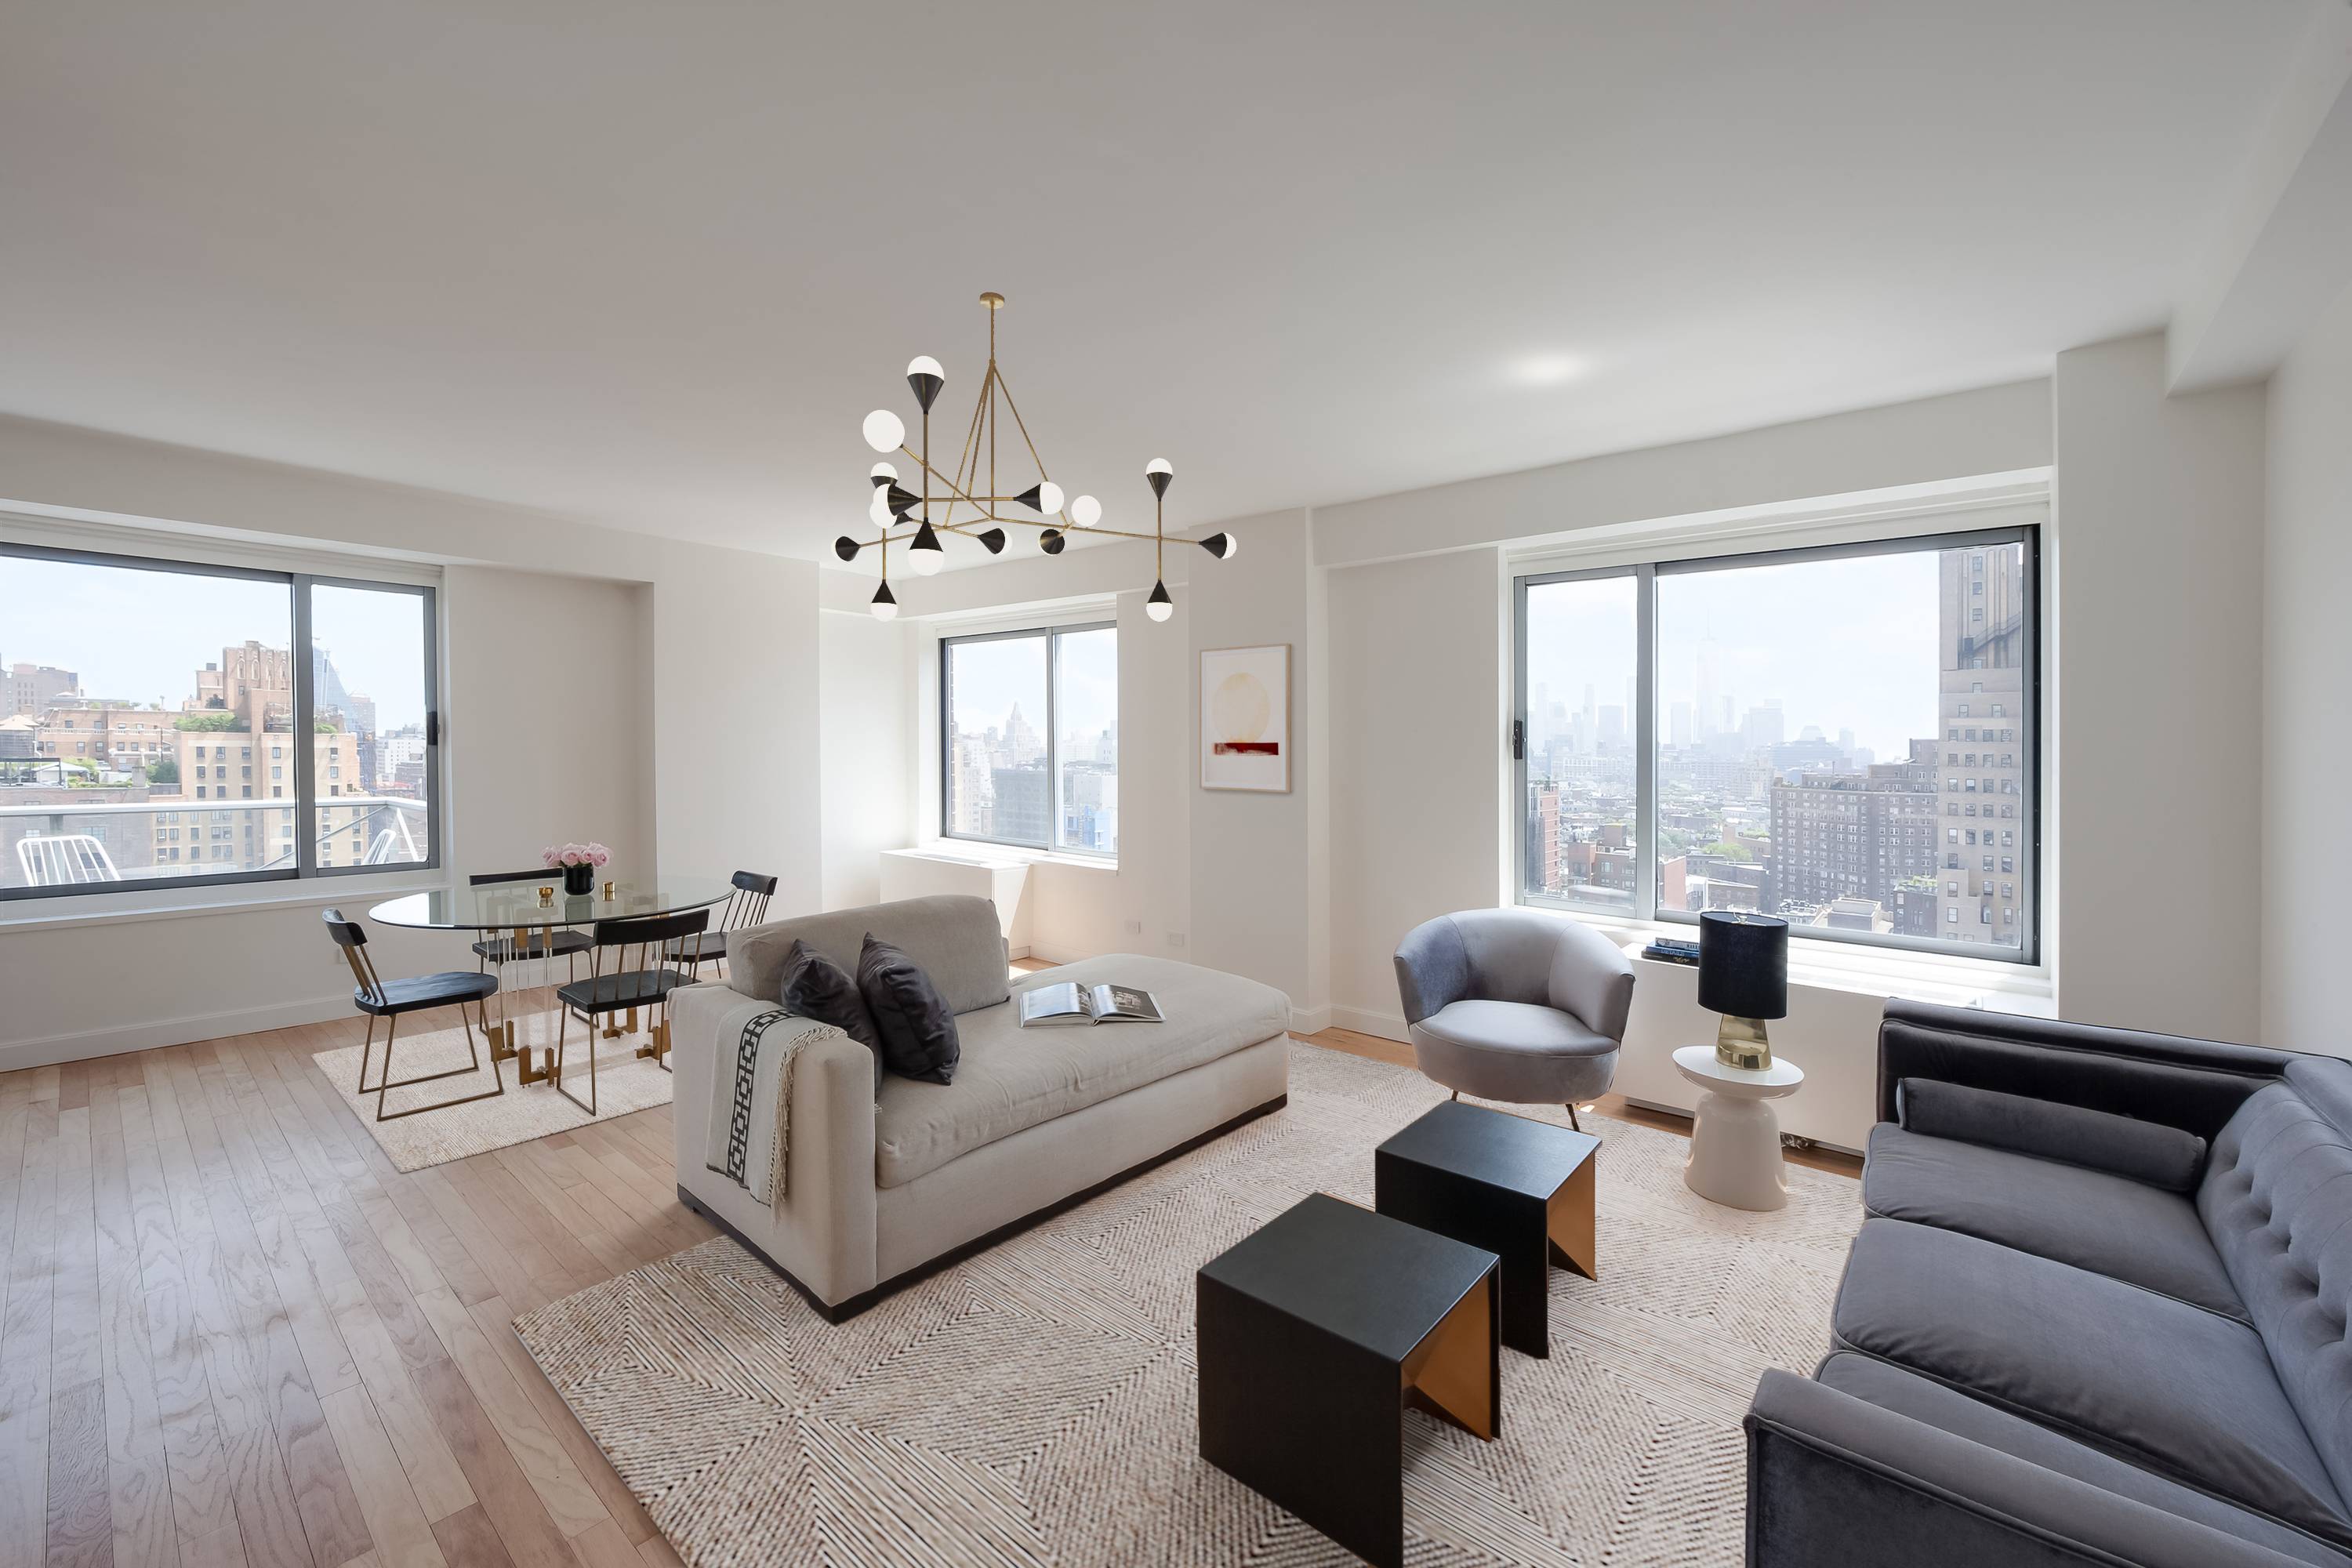 270 WEST 17TH CHIC 1000sf CORNER ONE BEDROOM PENTHOUSE WITH JAW DROPPING VIEWS|NEW DESIGNER RENOVATIONS